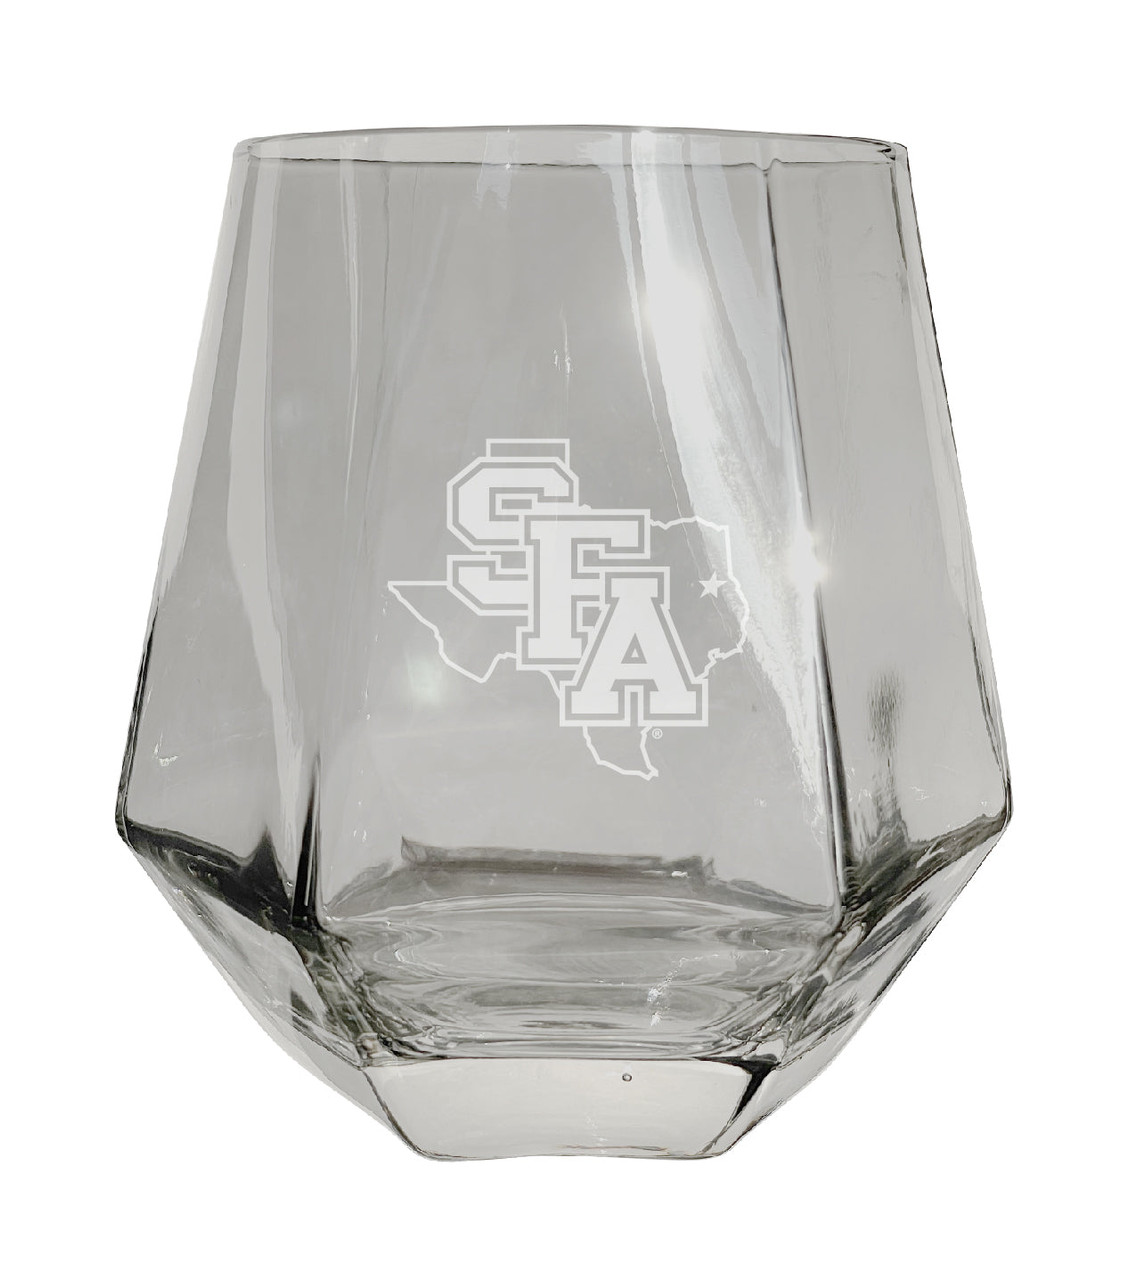 Stephen F. Austin State University Etched Diamond Cut Stemless 10 ounce Wine Glass Clear